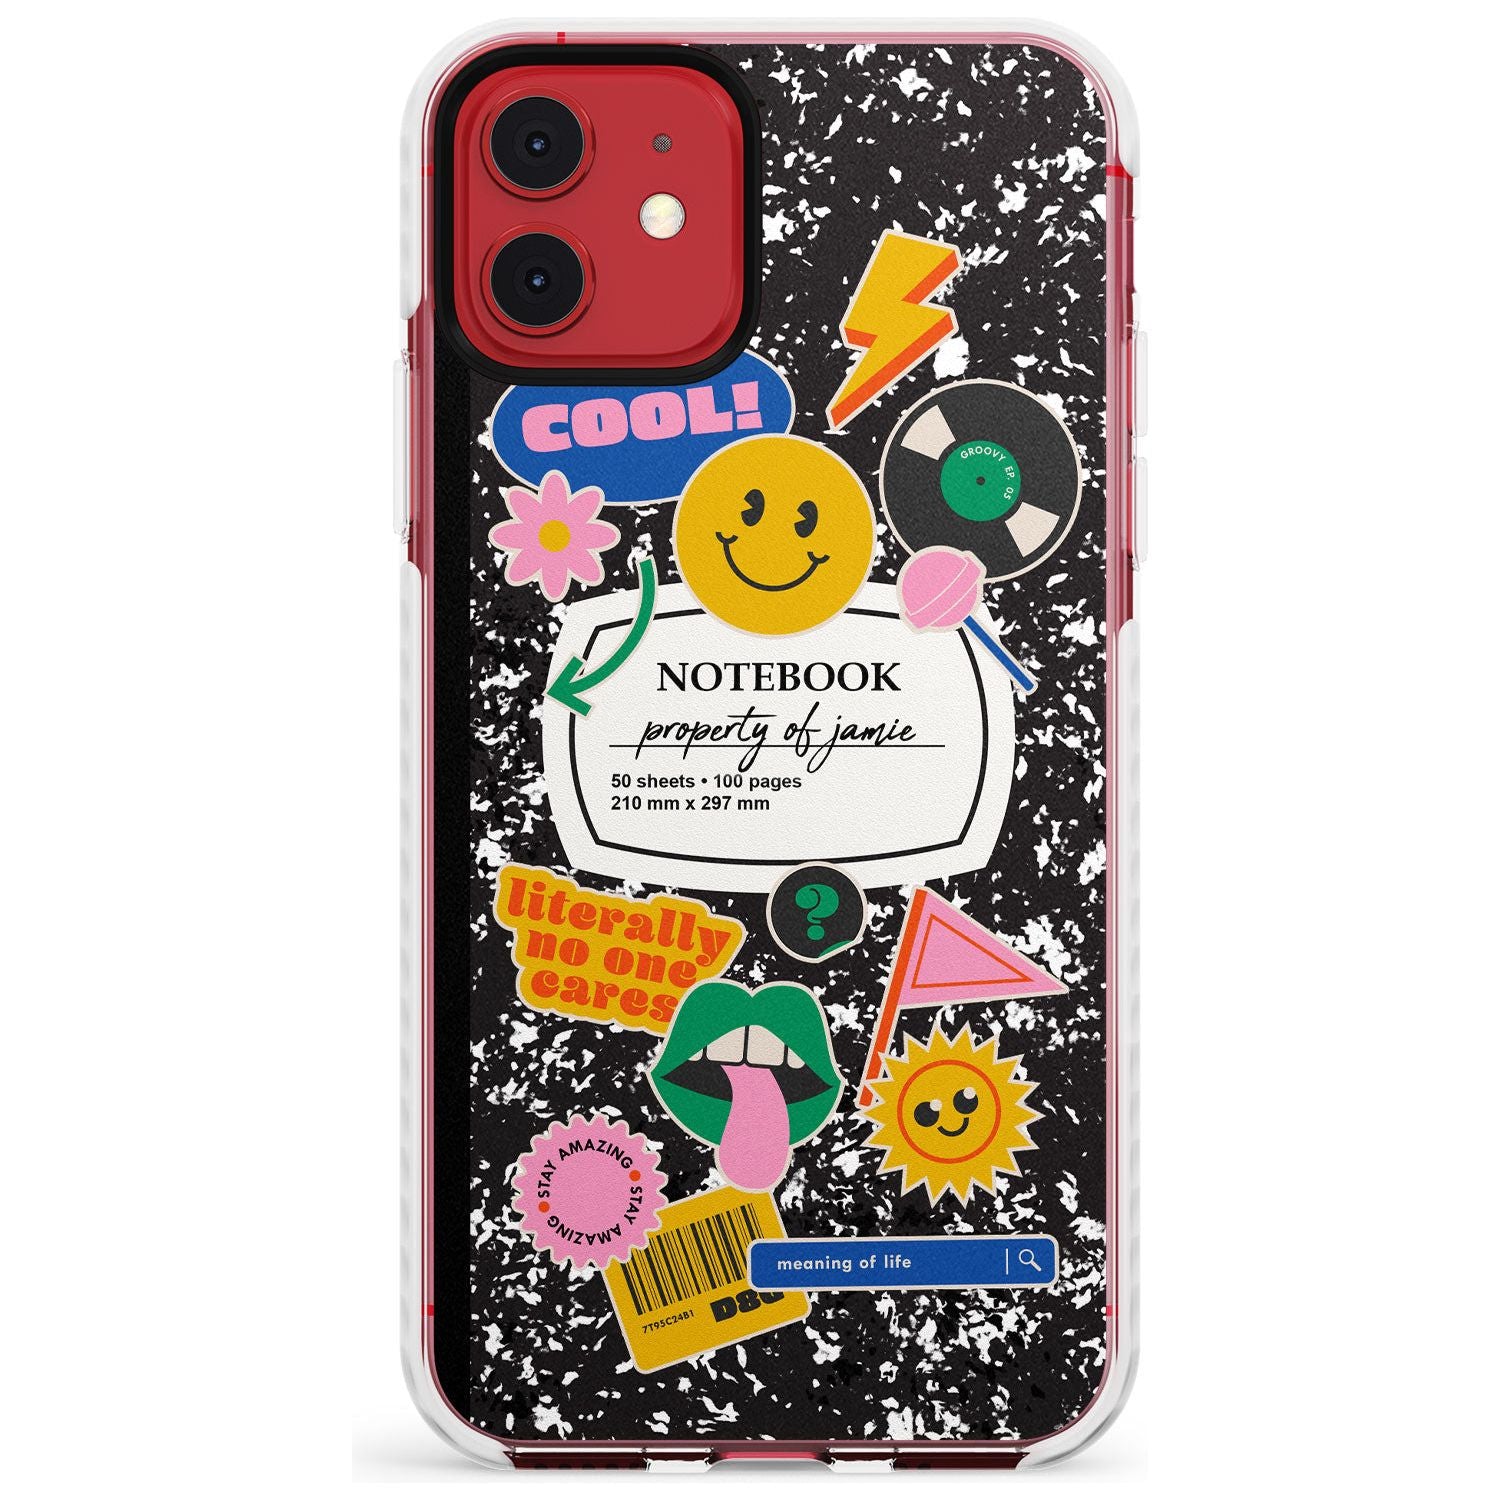 Custom Notebook Cover with Stickers Slim TPU Phone Case for iPhone 11